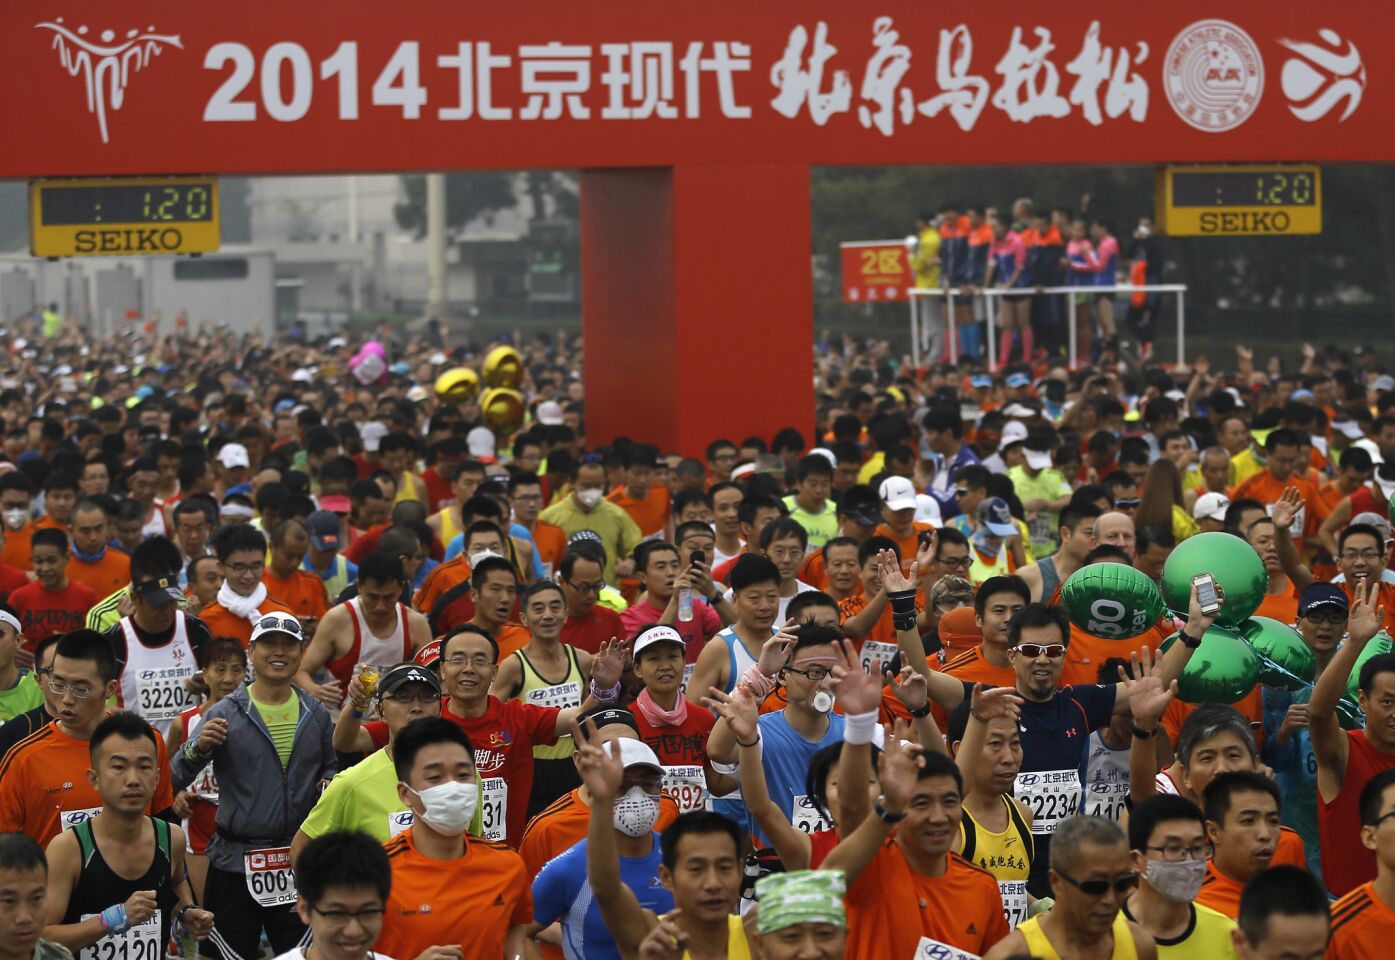 Runners, some wearing masks to protect themselves from pollutants, jog at Tiananmen Square shrouded in haze at the start of 2014 Beijing International Marathon.